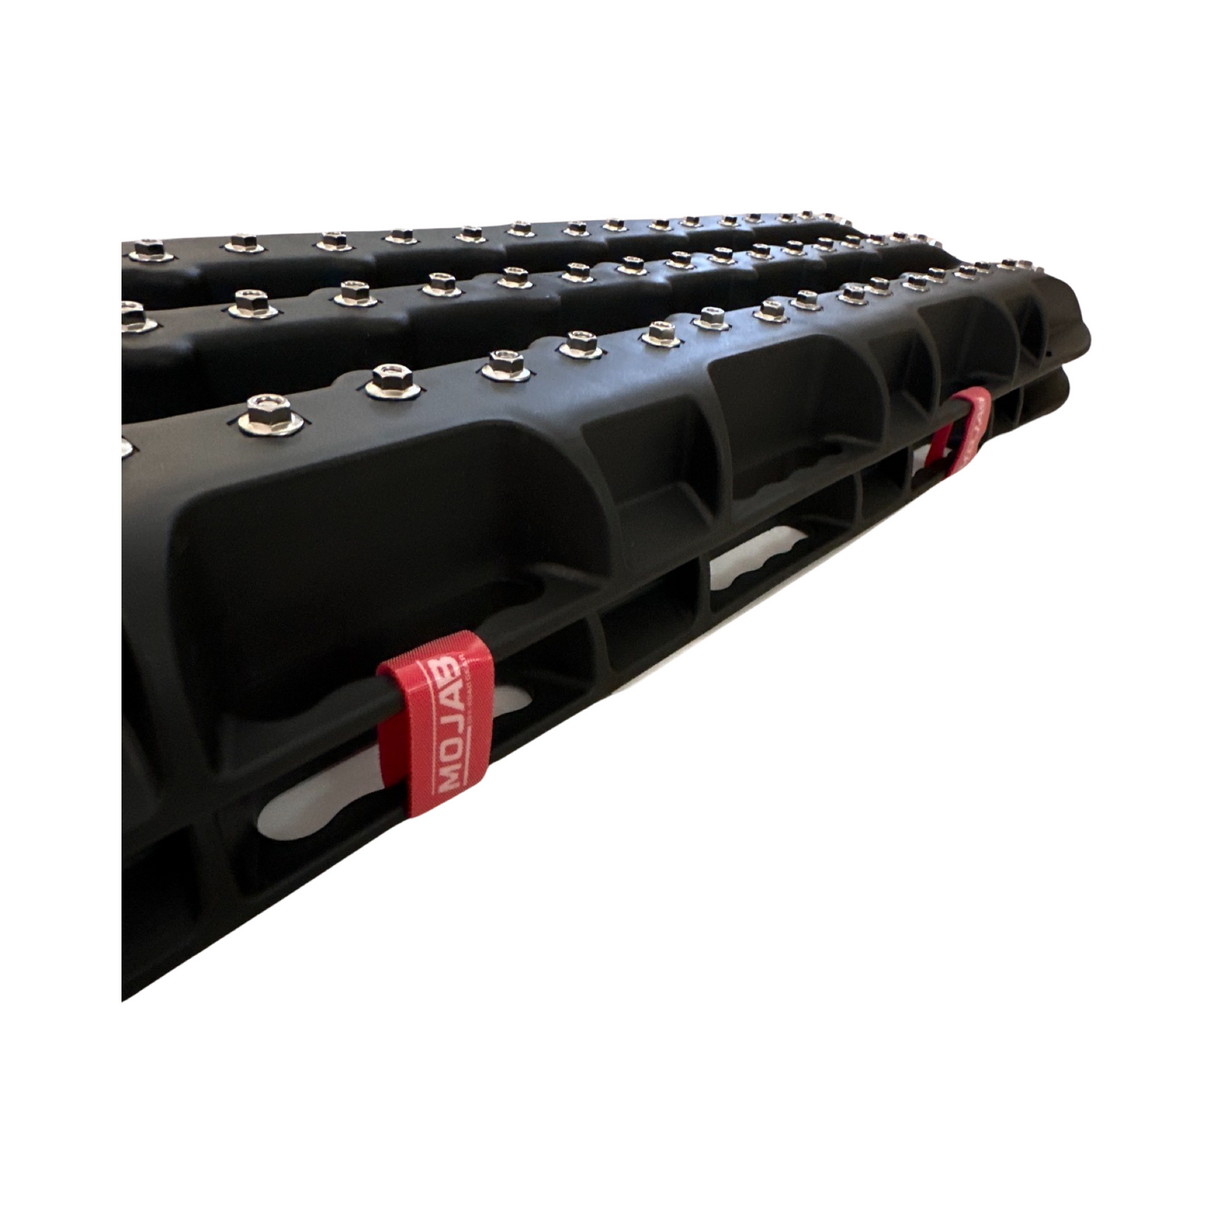 Ultimate Traction recovery board with steel plugs and storage bag.